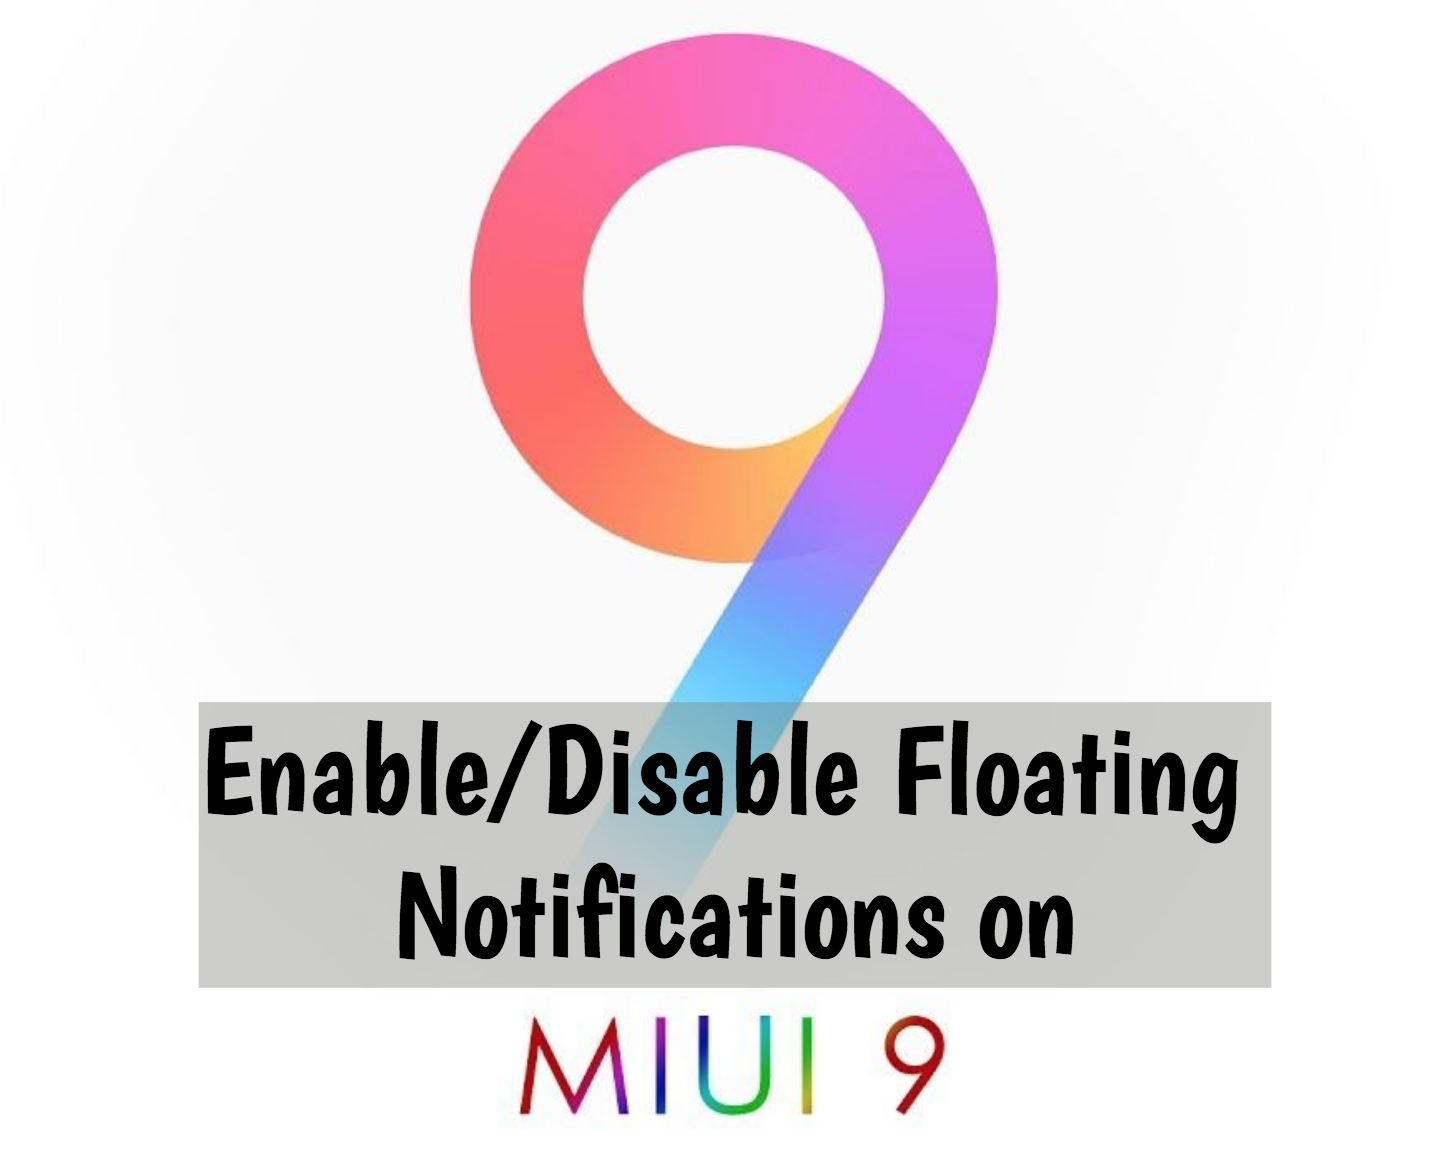 Enable/Disable Floating Notifications on MIUI 9